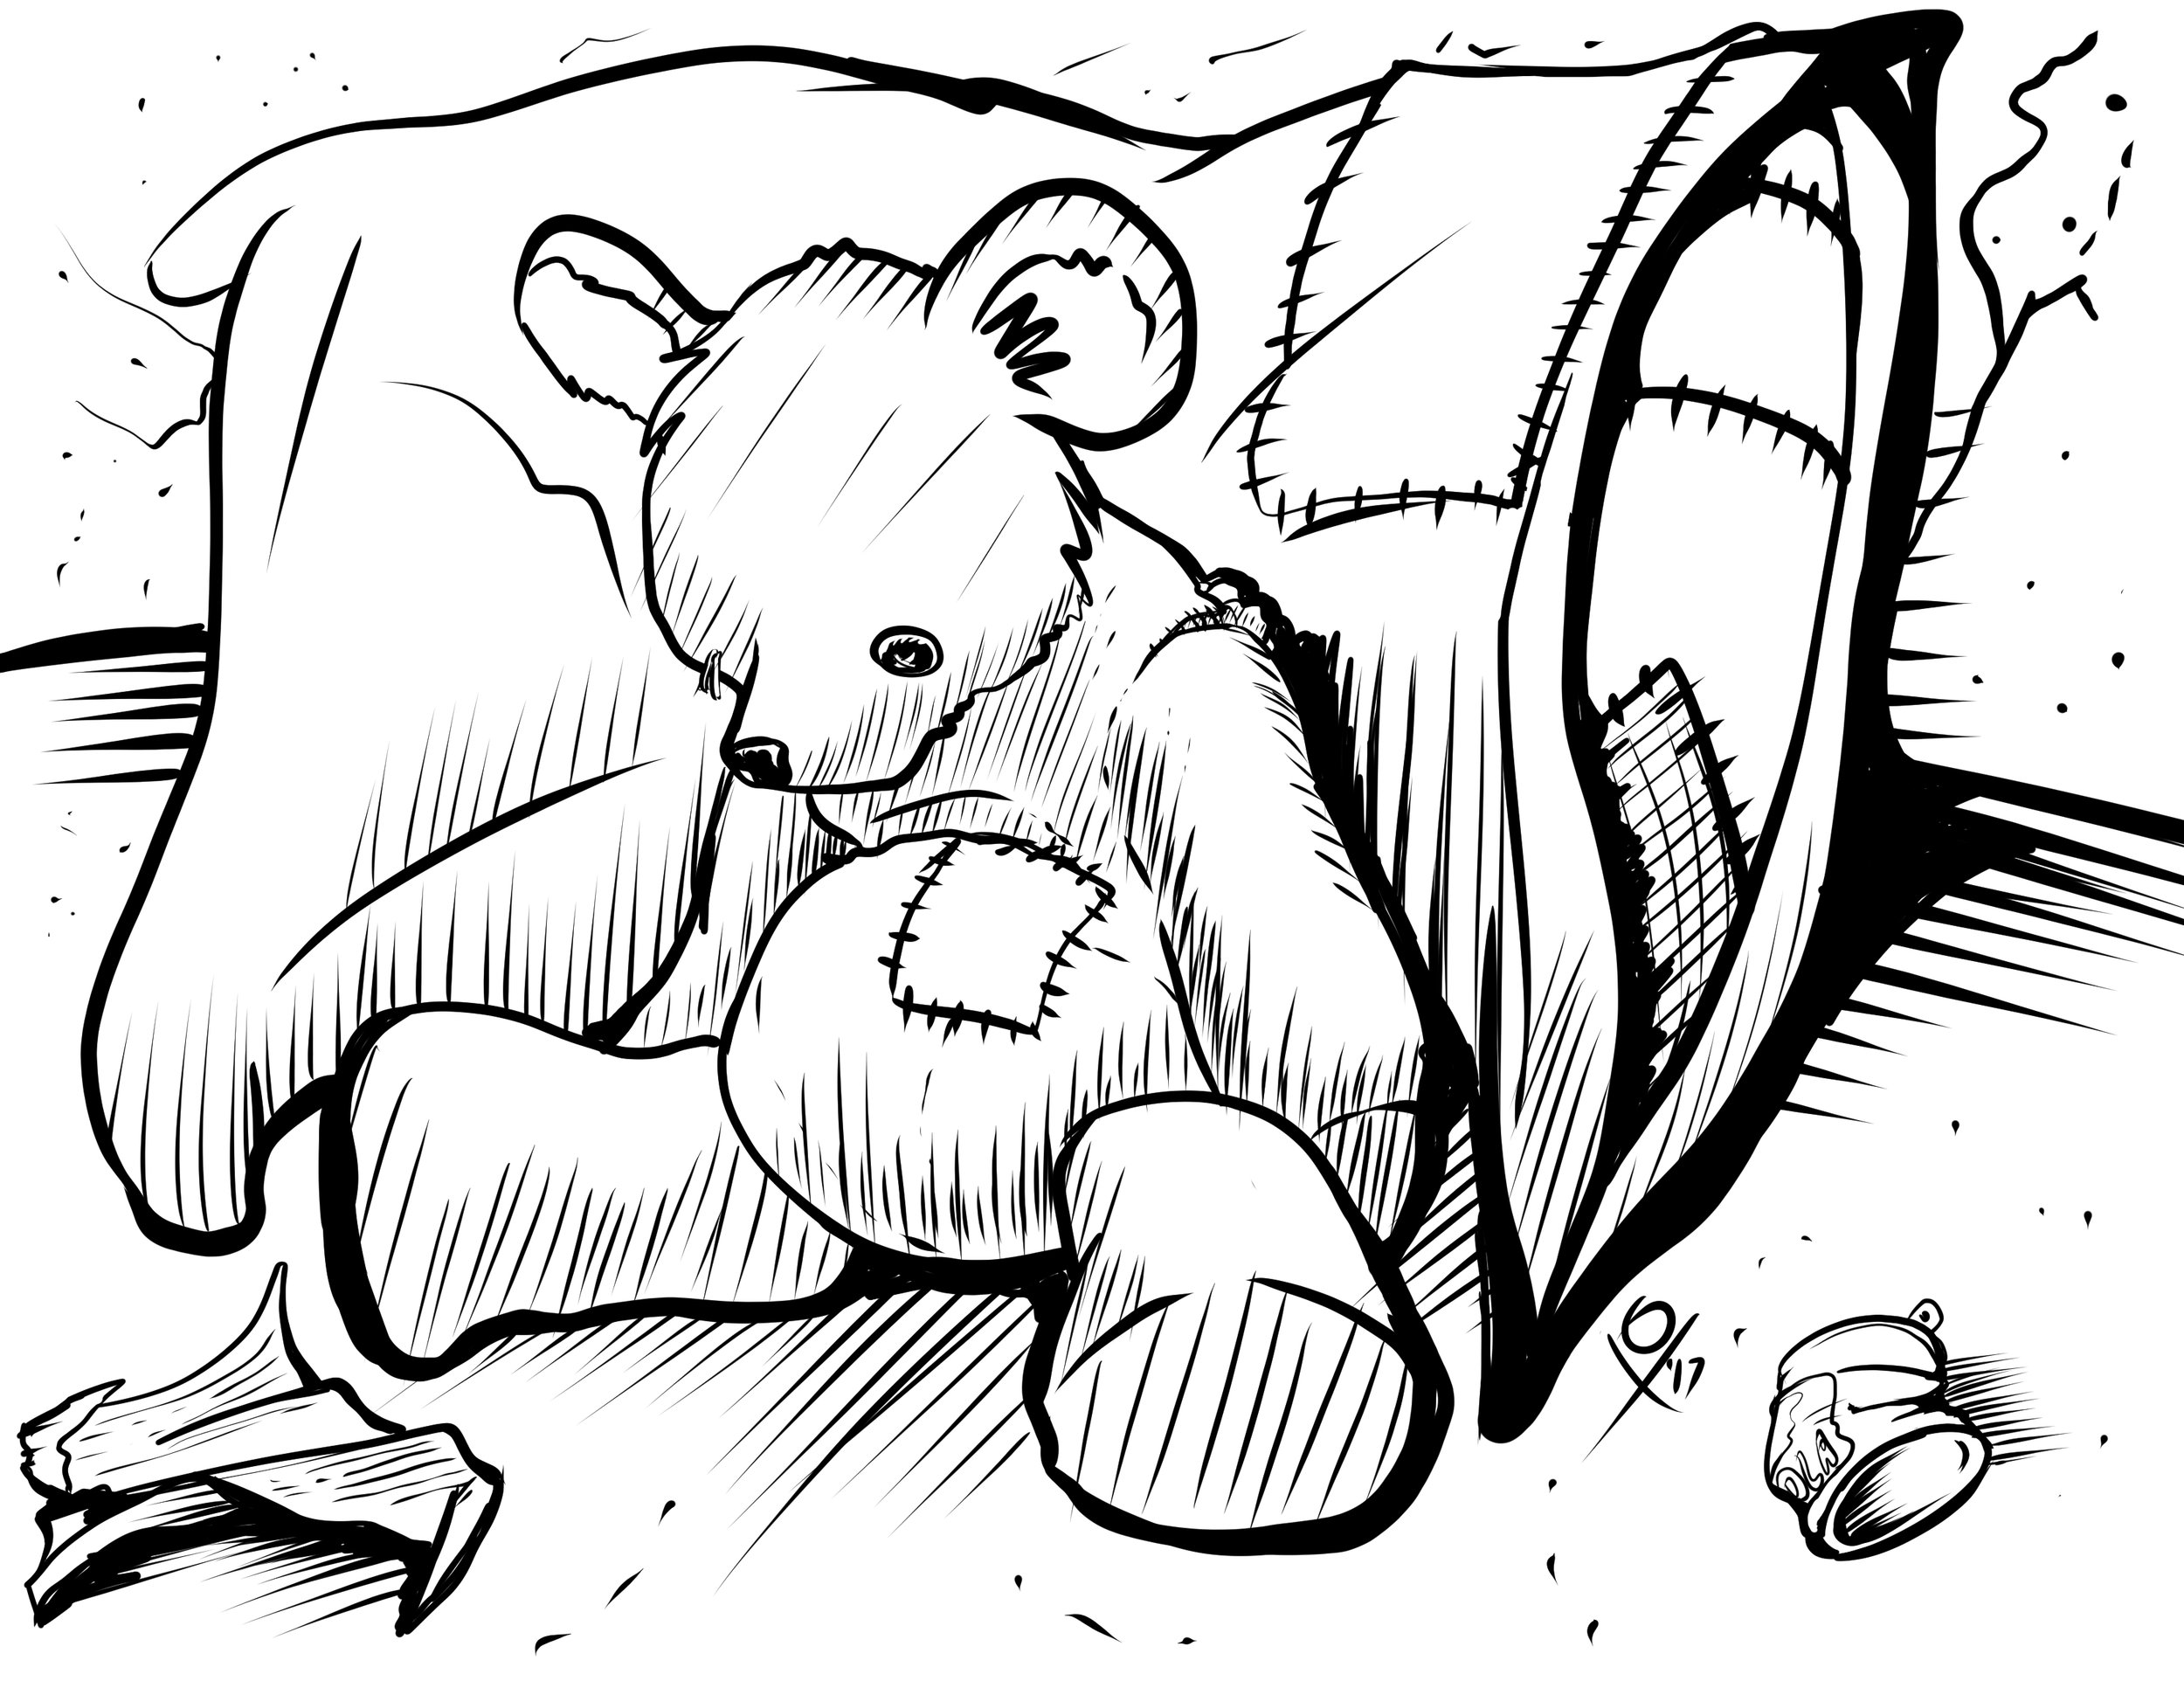 149-Patched Pillow w Teddy Bear.jpg